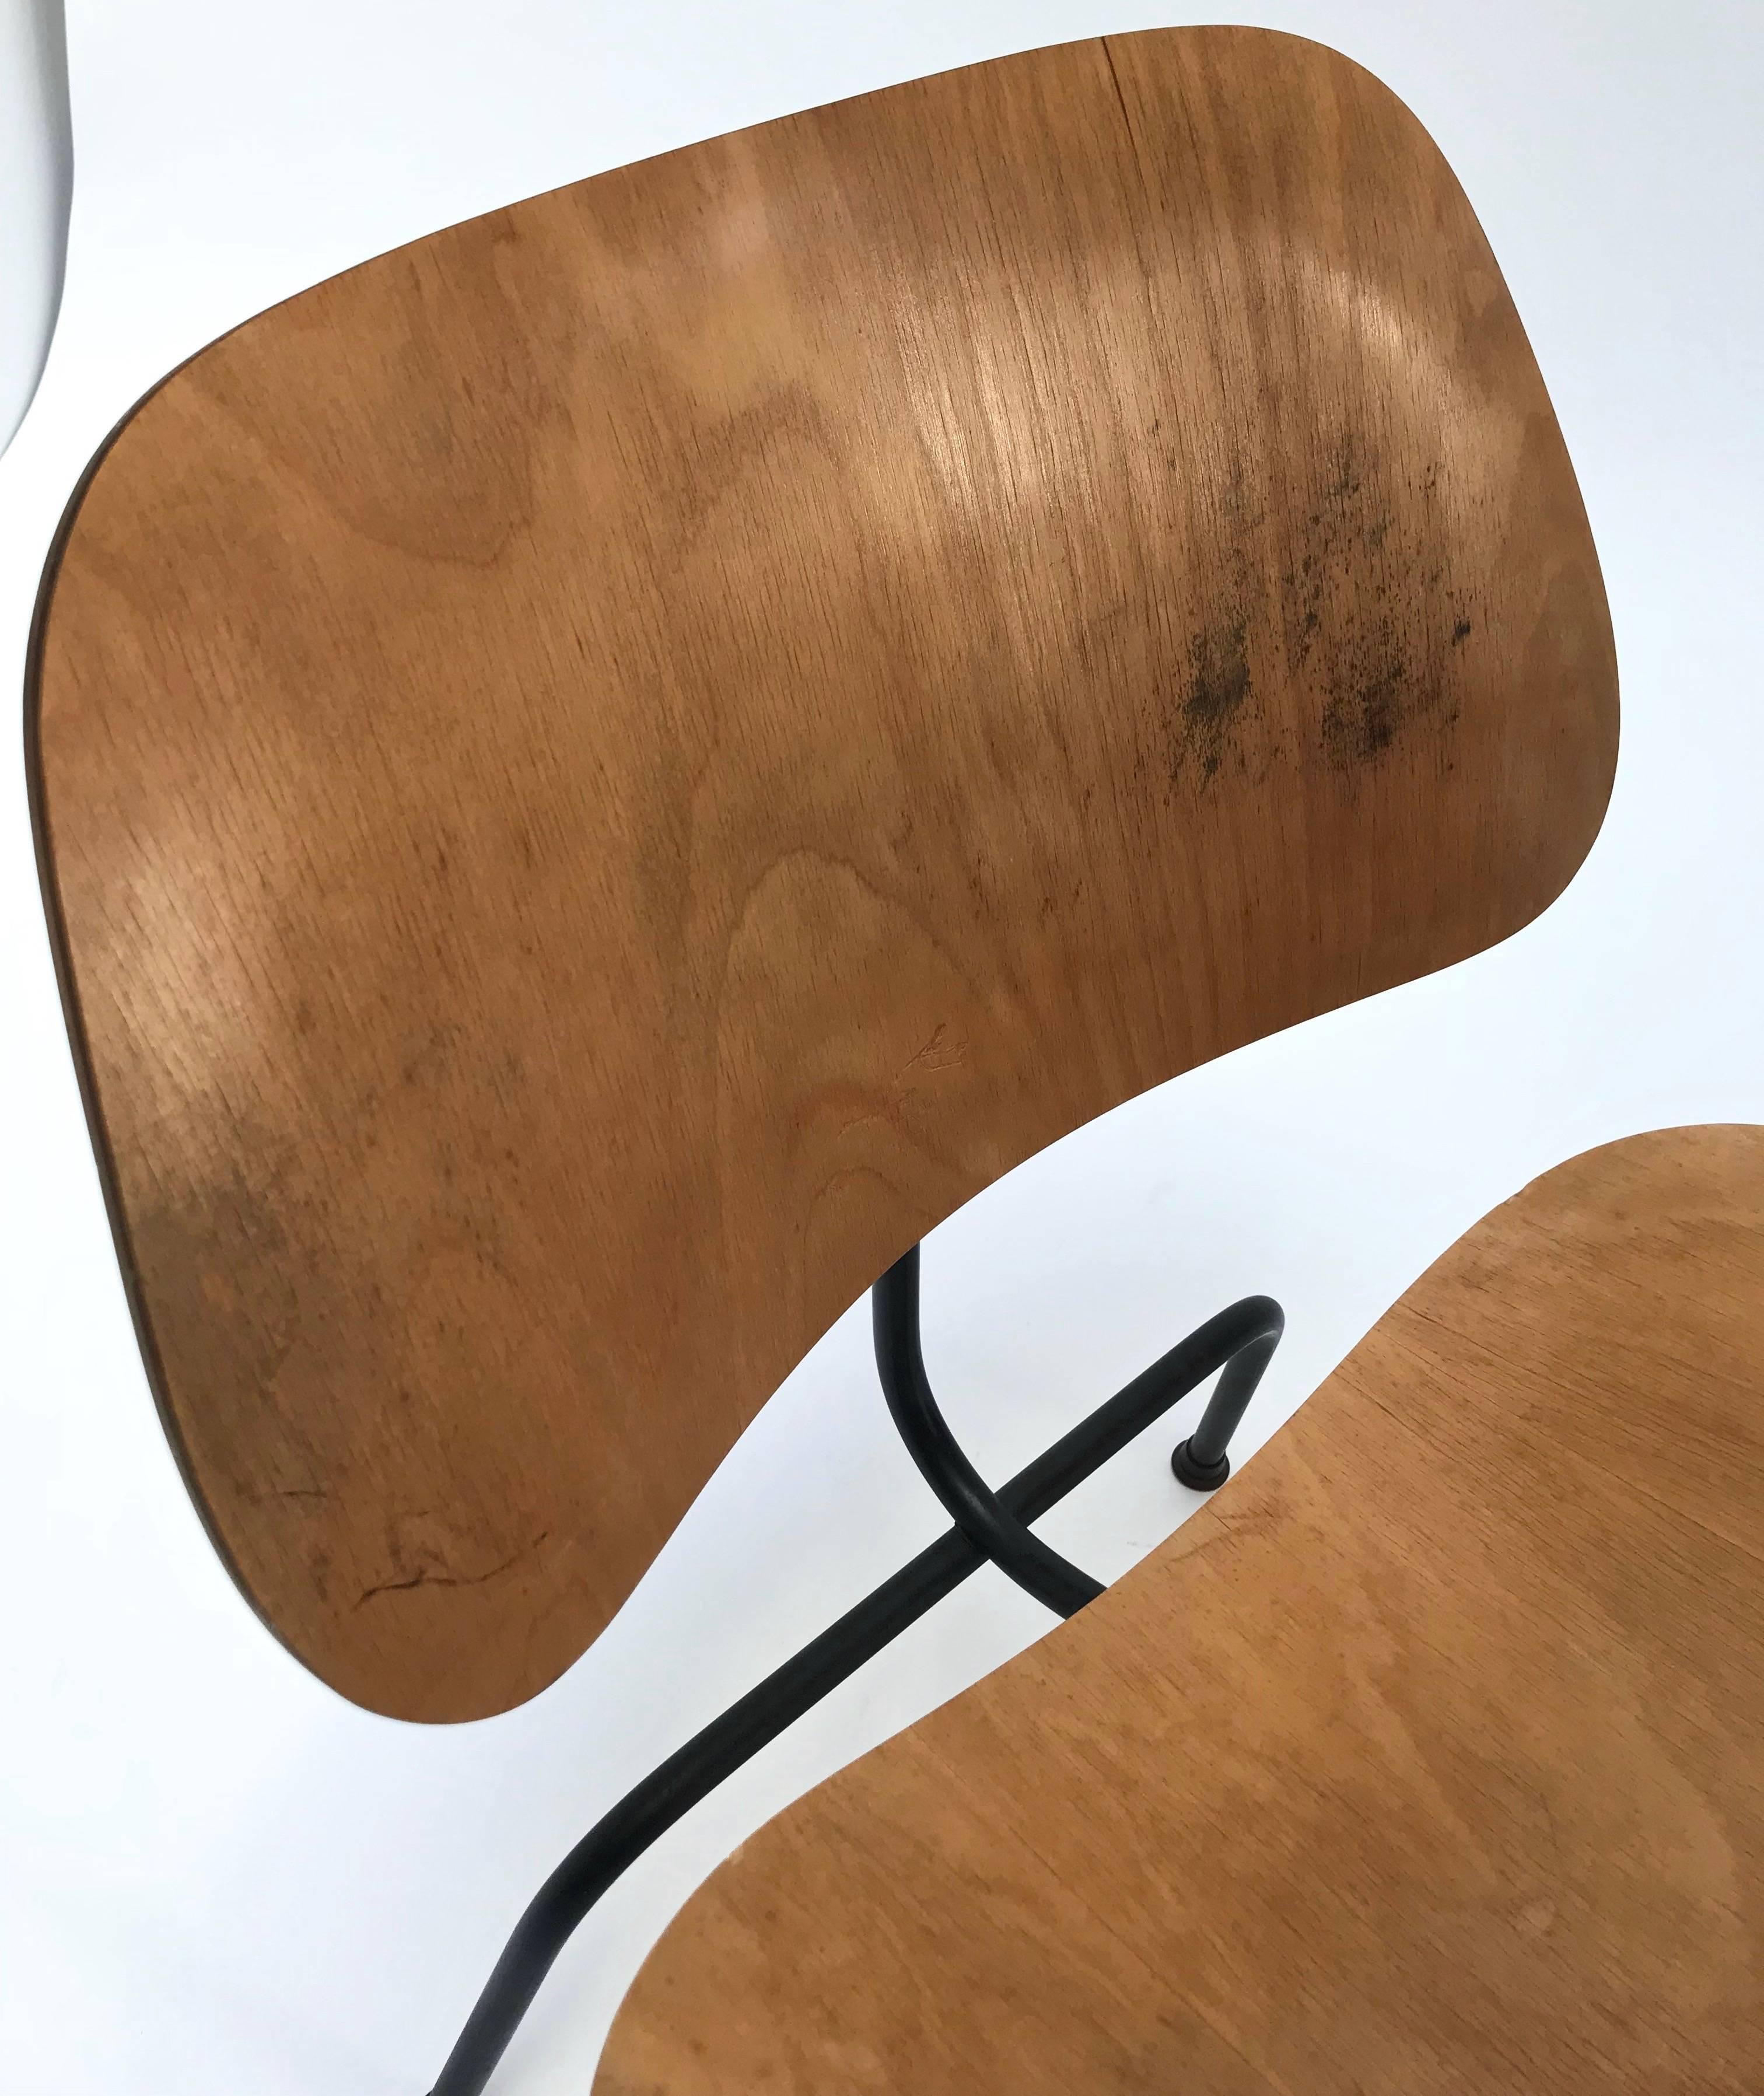 American Charles and Ray Eames for Herman Miller 1950s LCM Chair